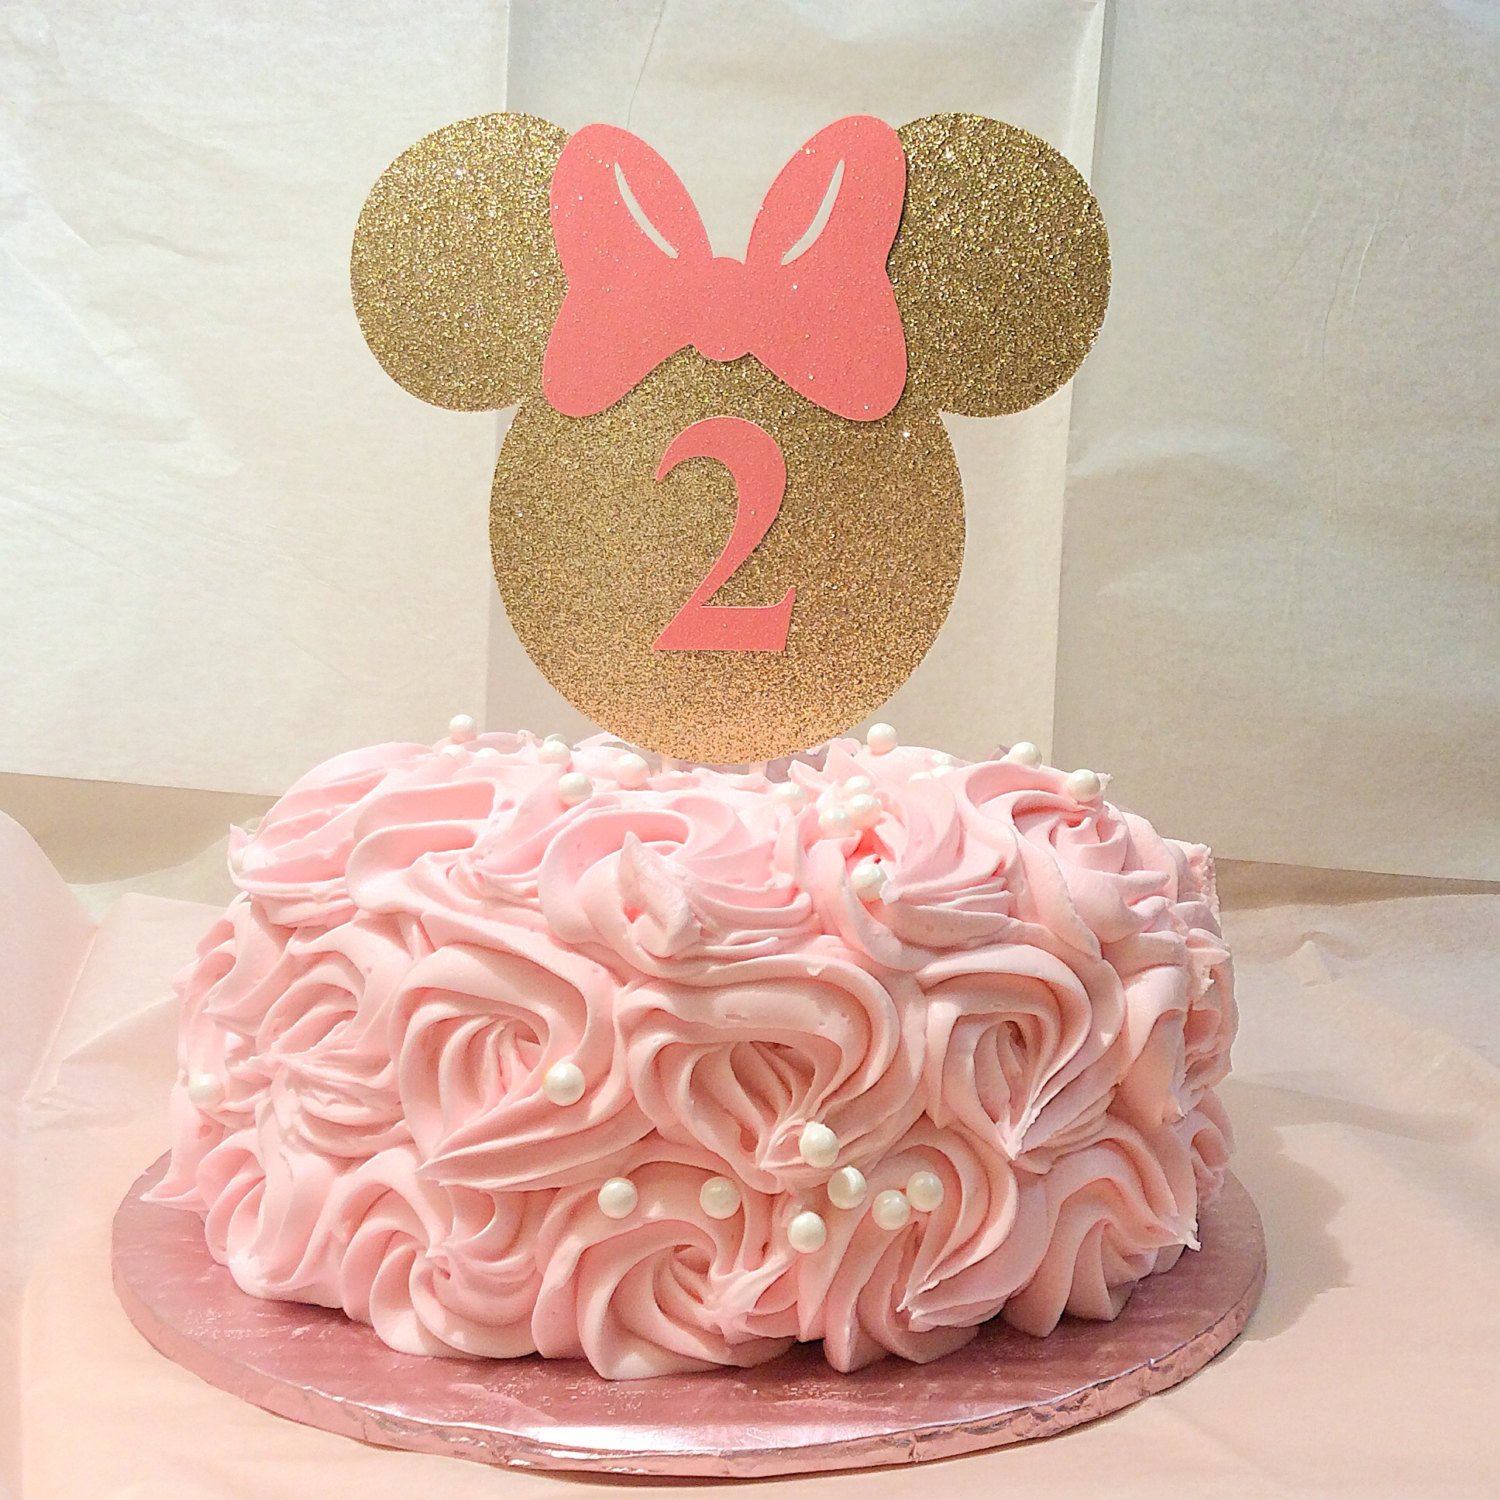 Minnie Mouse Birthday Cake Topper
 Gold and pink Minnie Mouse cake topper Minnie mouse gold